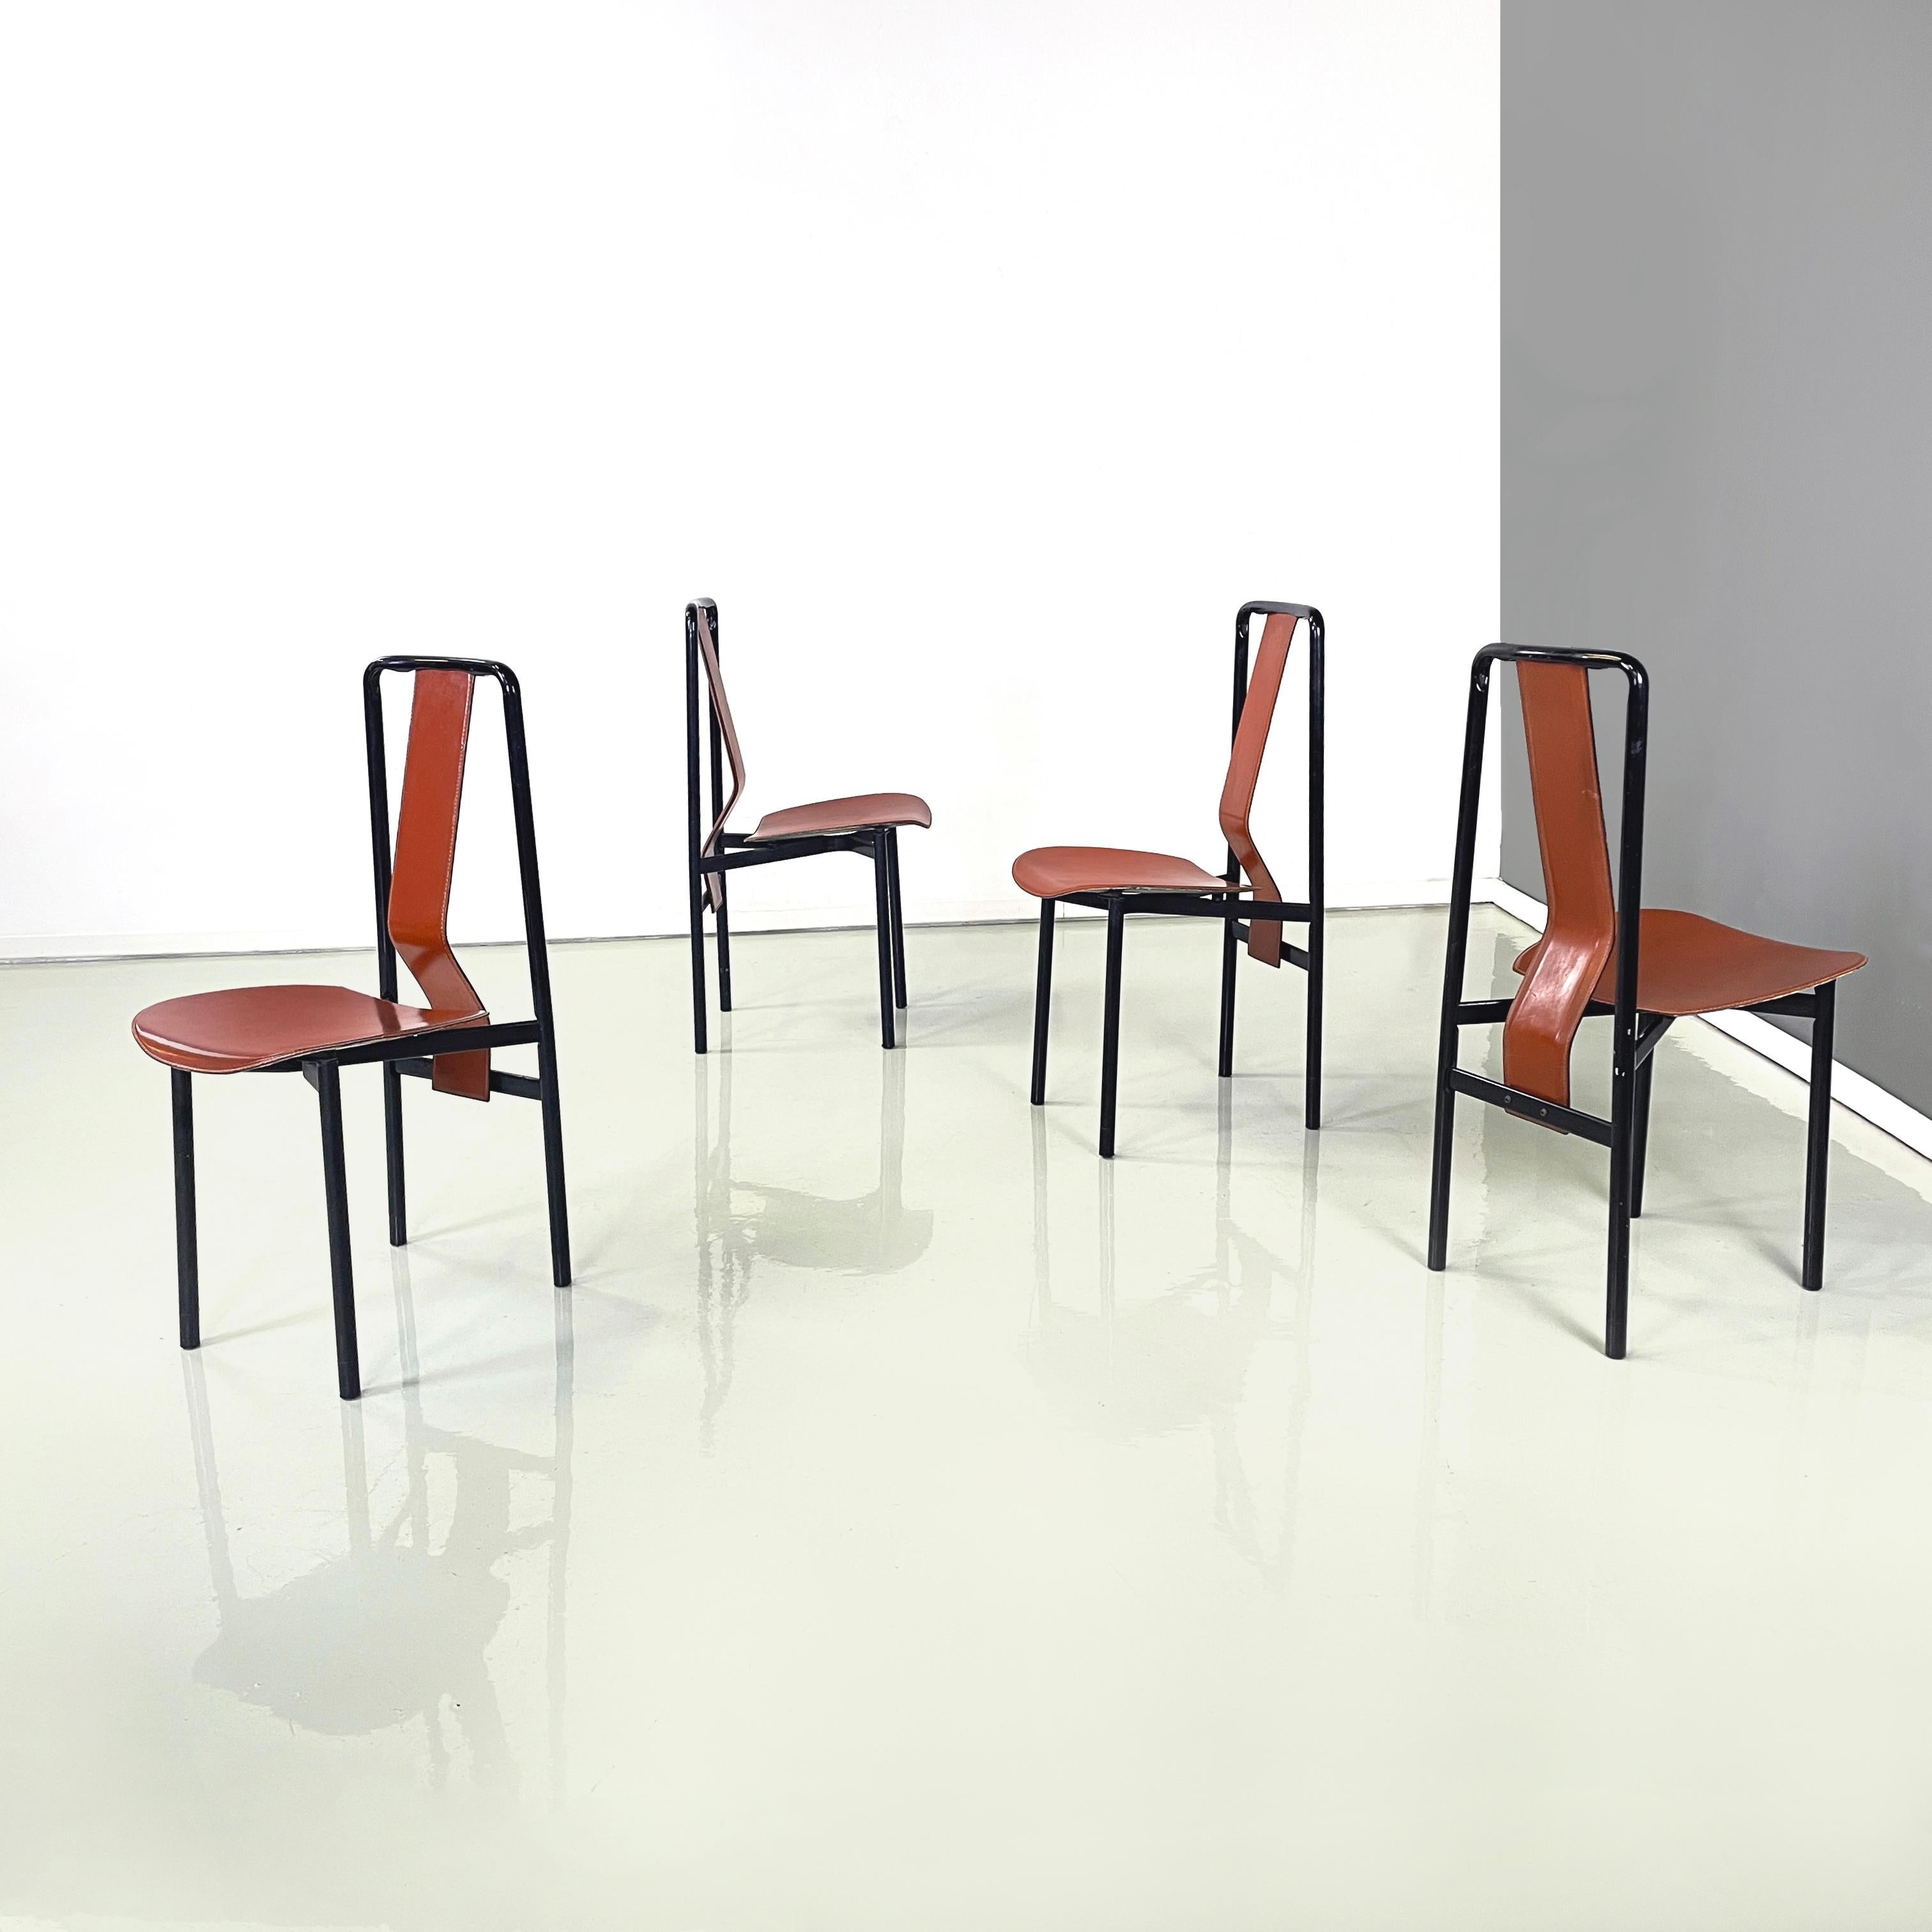 Italian modern Brown leather and black metal Chairs Irma by Achille Castiglioni for Zanotta, 1970s
Set of 4 chairs mod. Irma in red-brown leather and black painted steel. The shaped and leather-covered backrest has a black metal tubular structure,